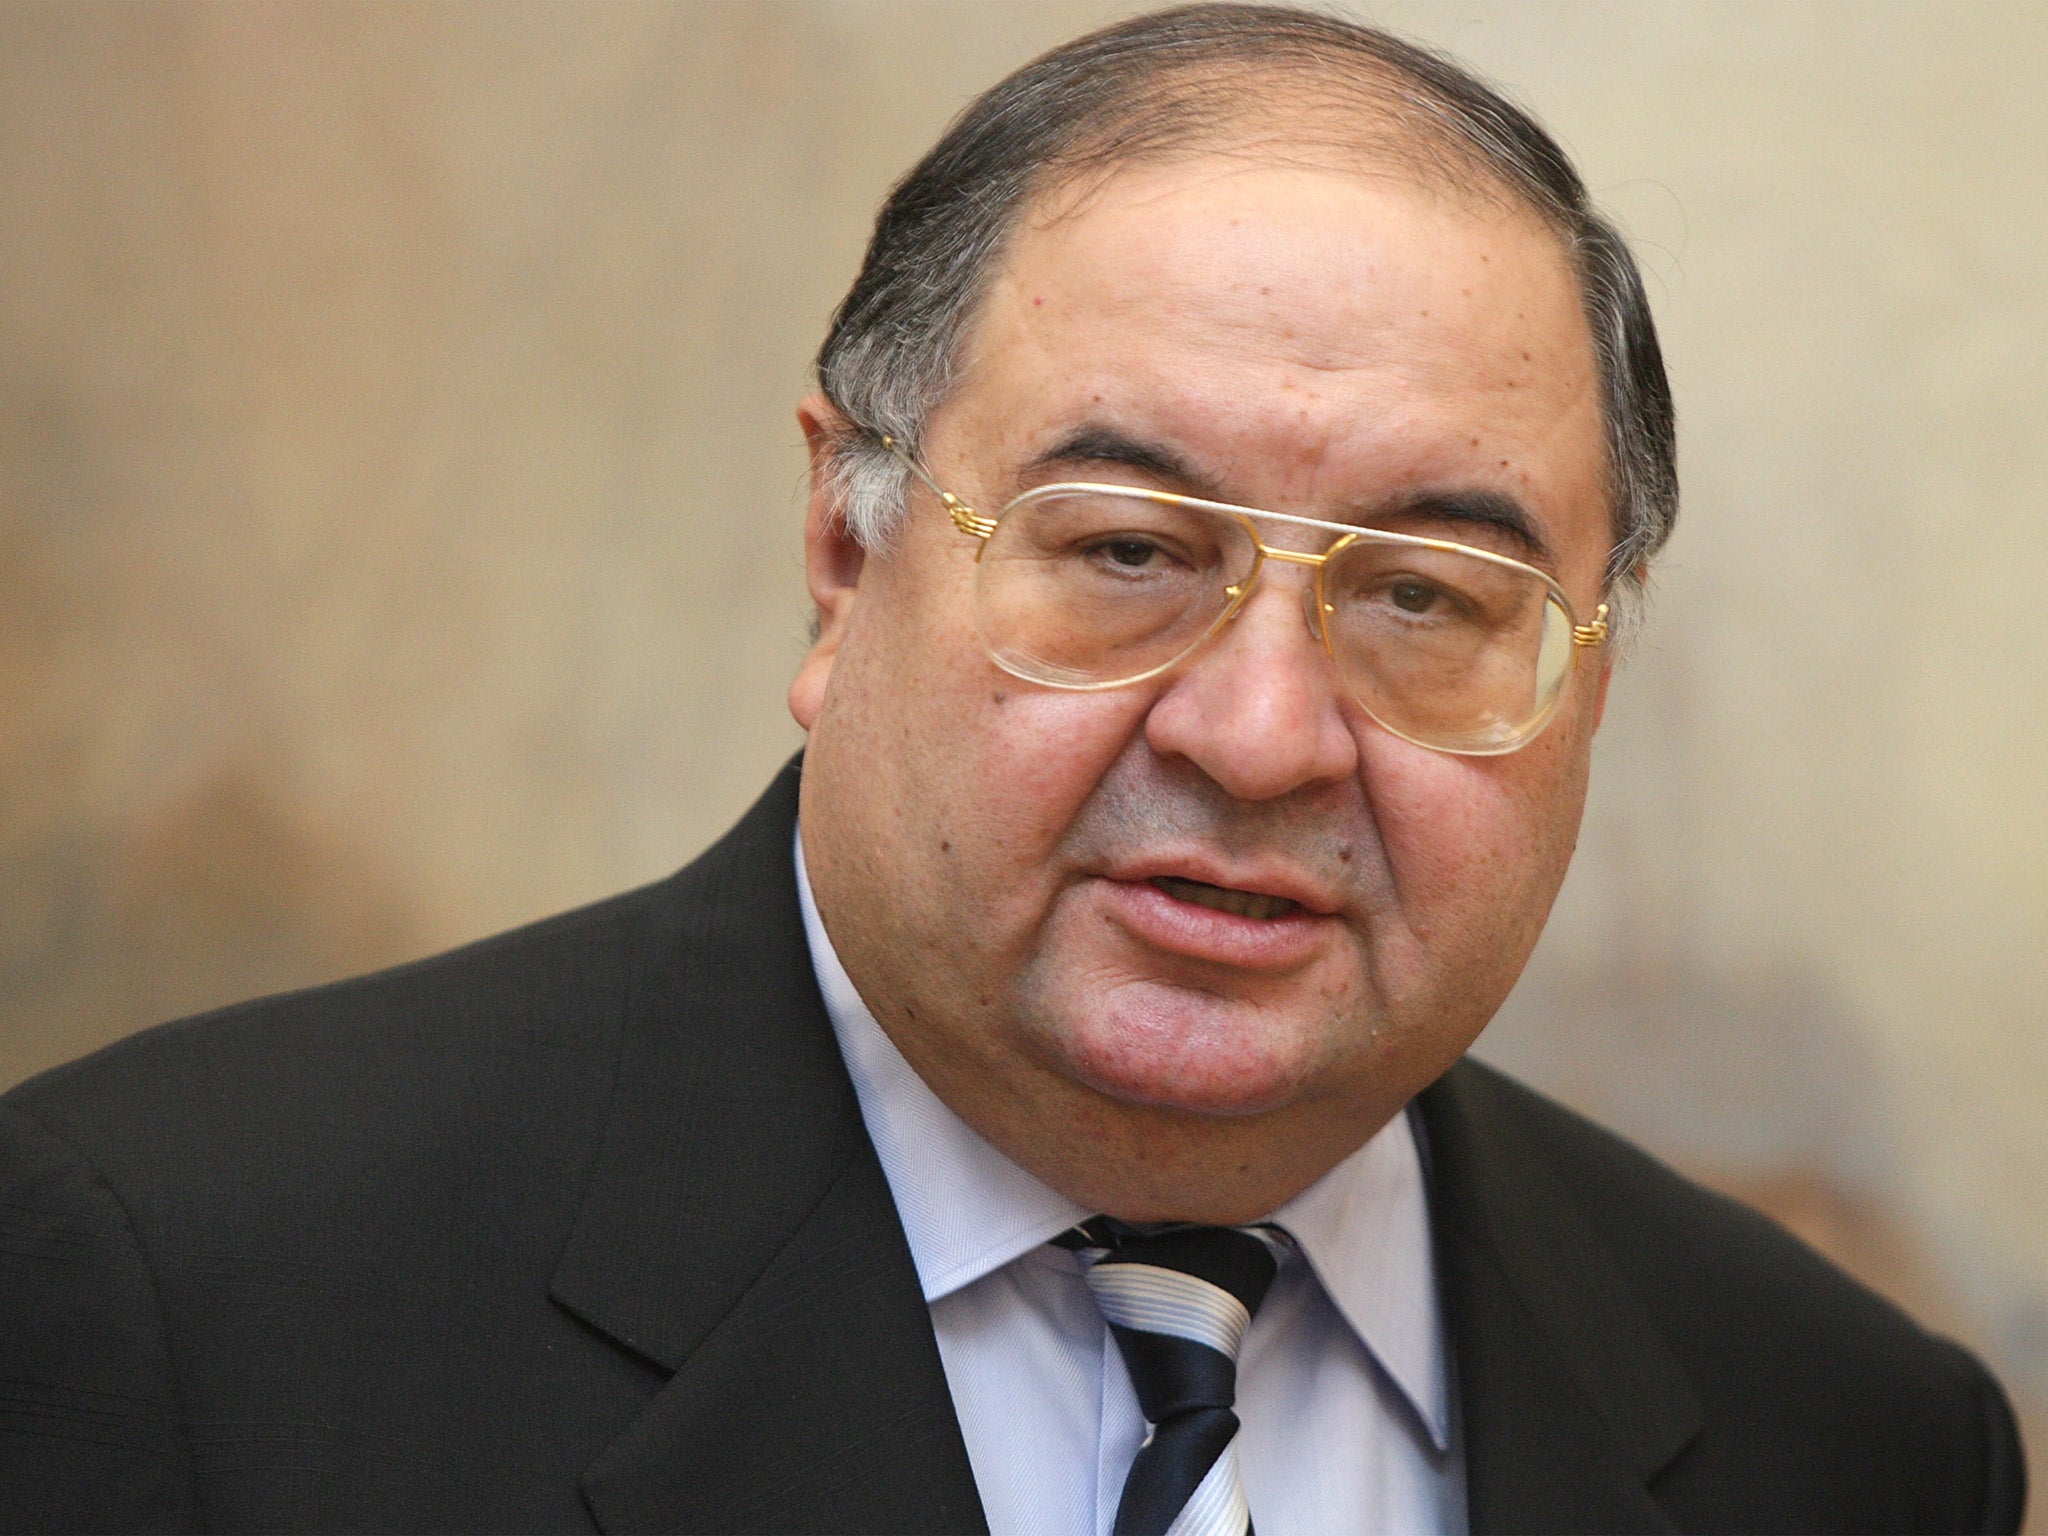 Alisher Usmanov holds almost 56 per cent of MegaFon and has a 30 per cent stake in Arsenal Football Club